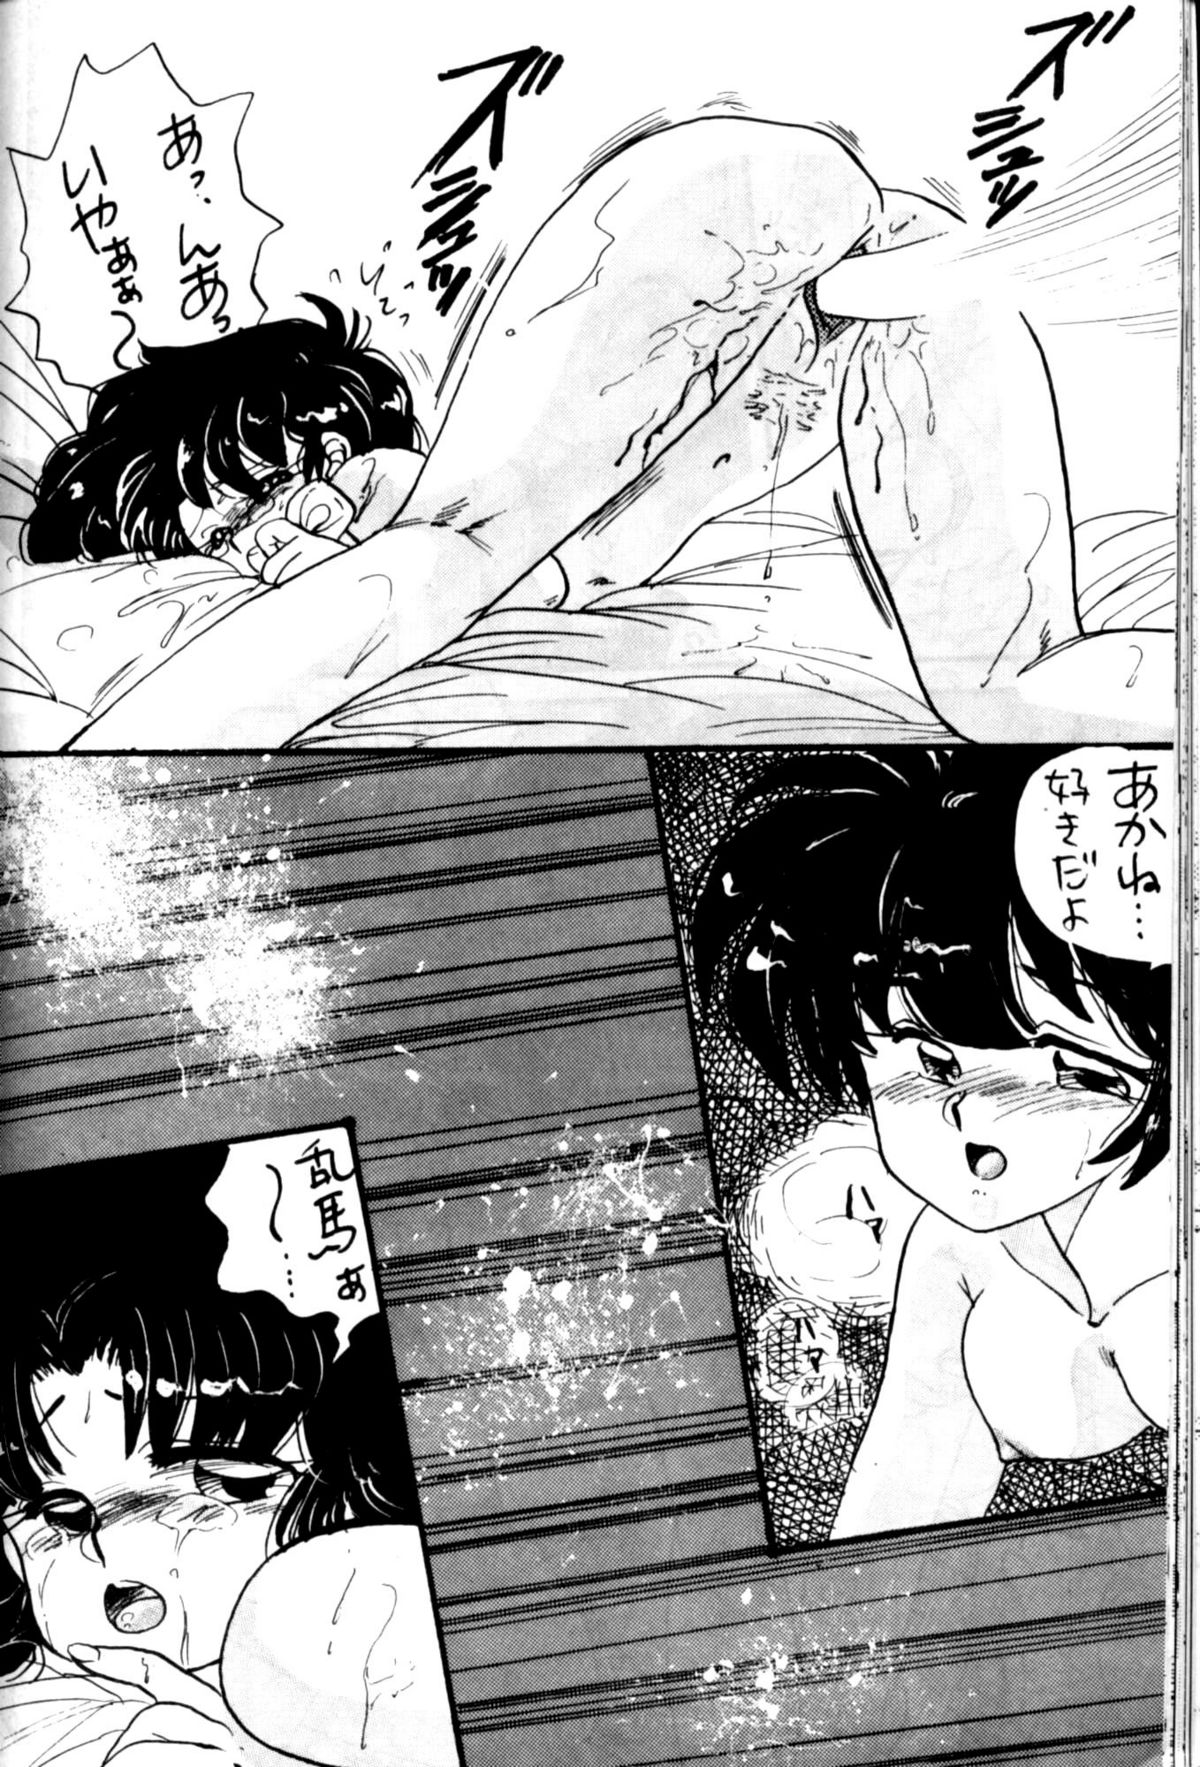 T You (Ranma 1/2) page 43 full